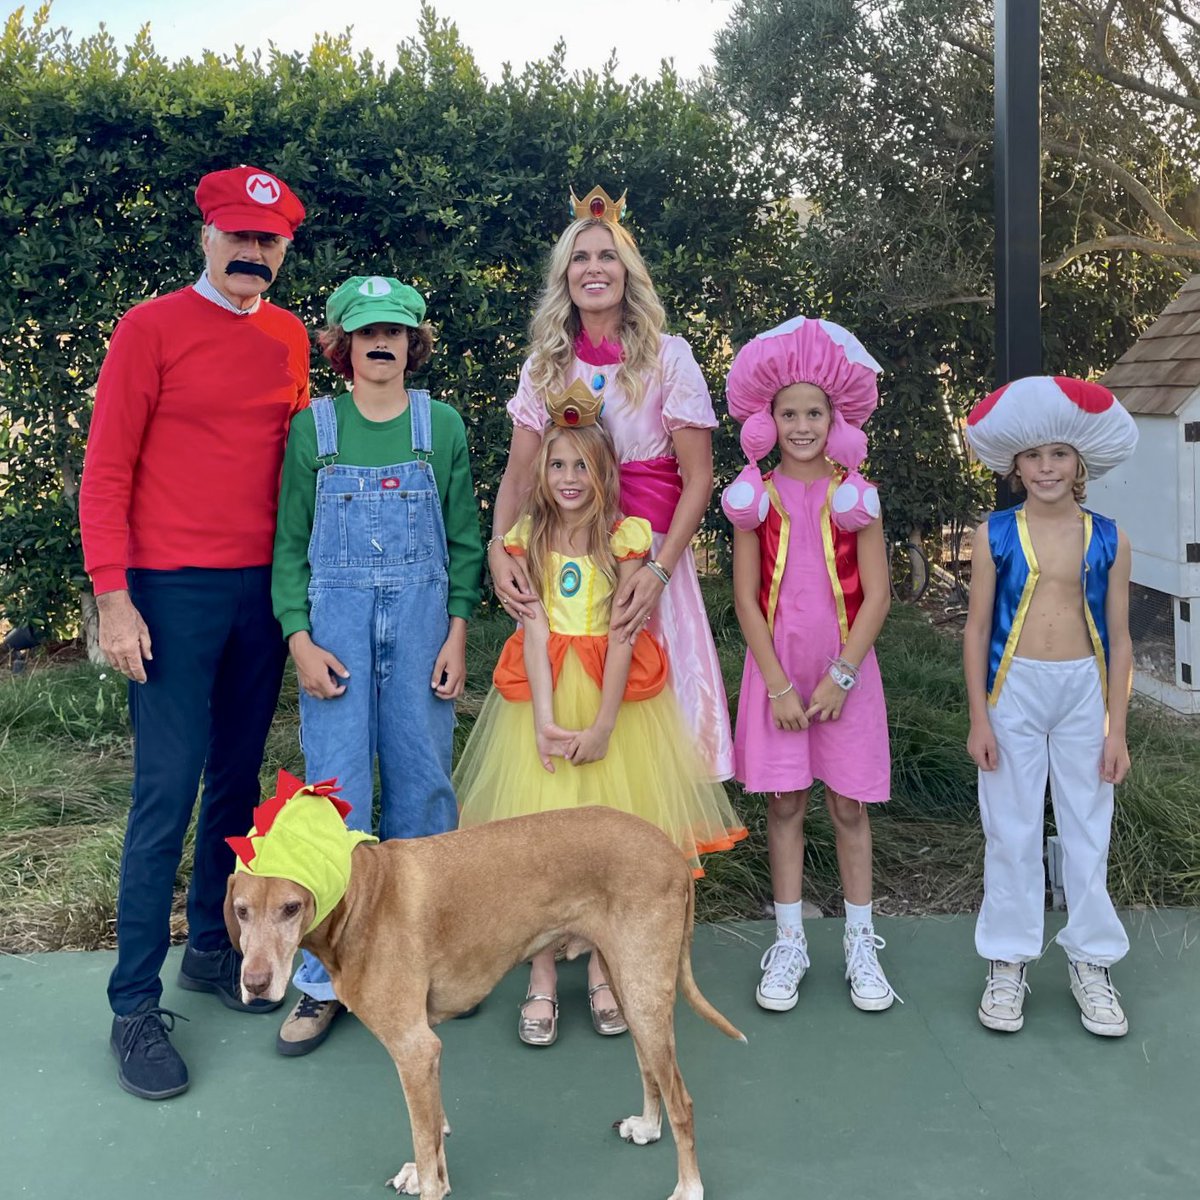 It’s a-me, Mario! Enjoyed dressing up with some of the grandkids this weekend. Happy Halloween 🎃